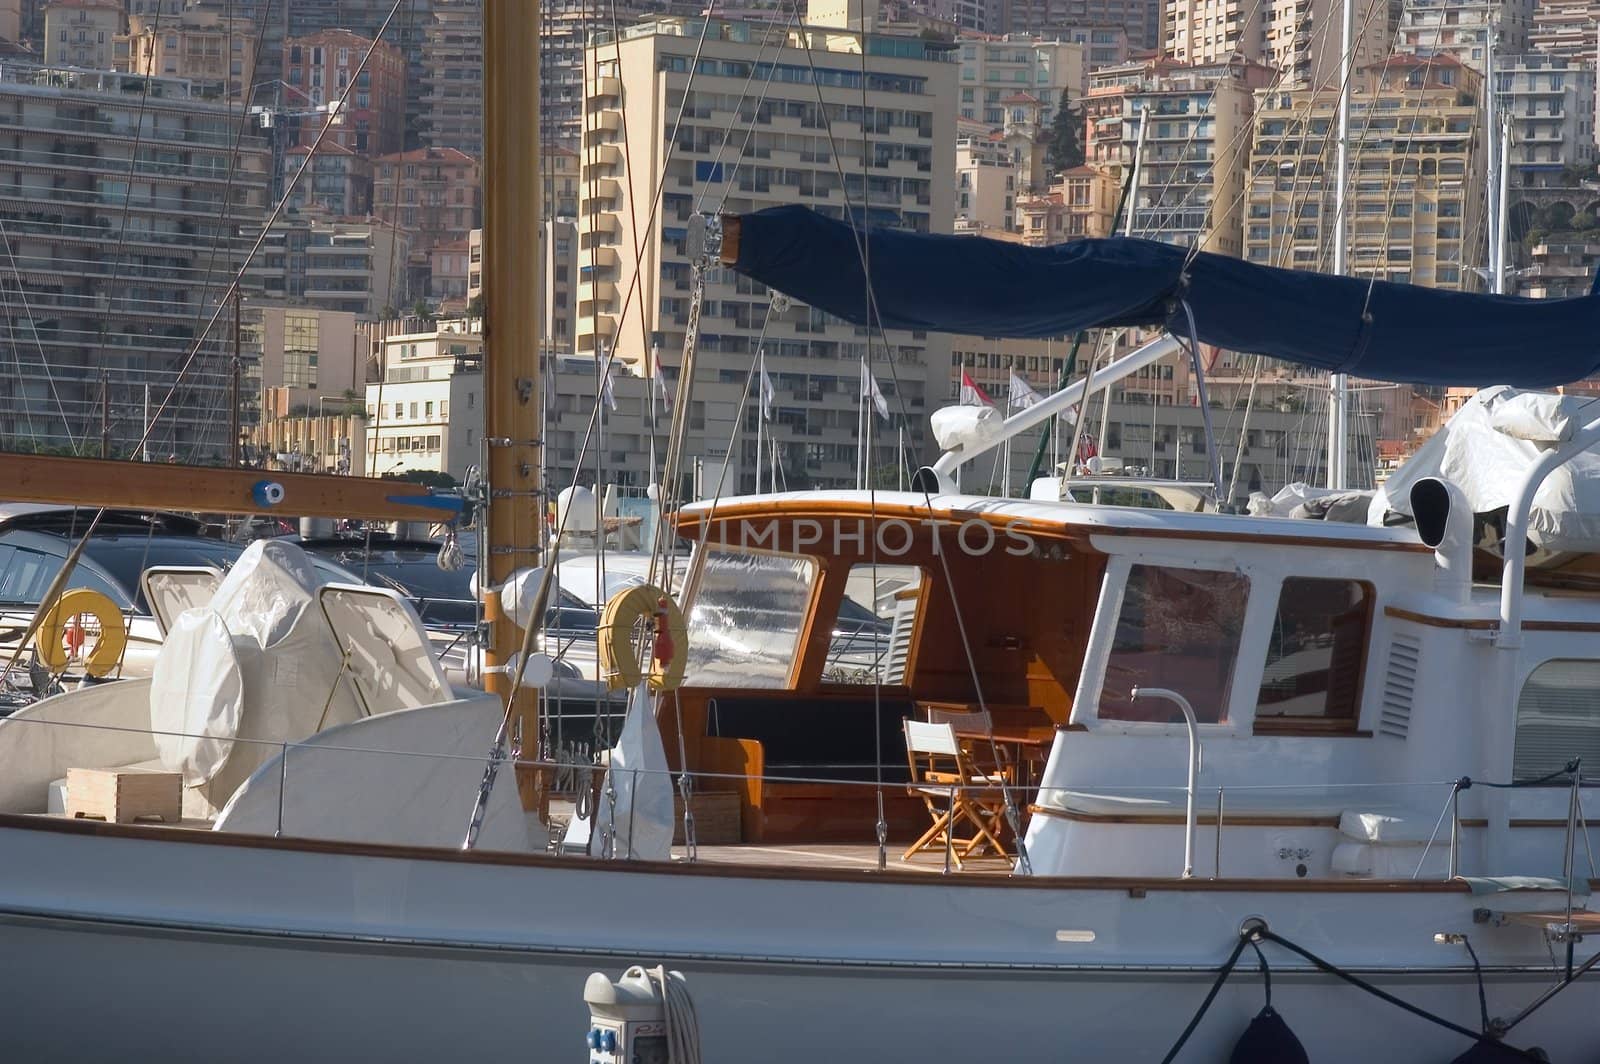 yachts in Monaco Harbour by gillespaire